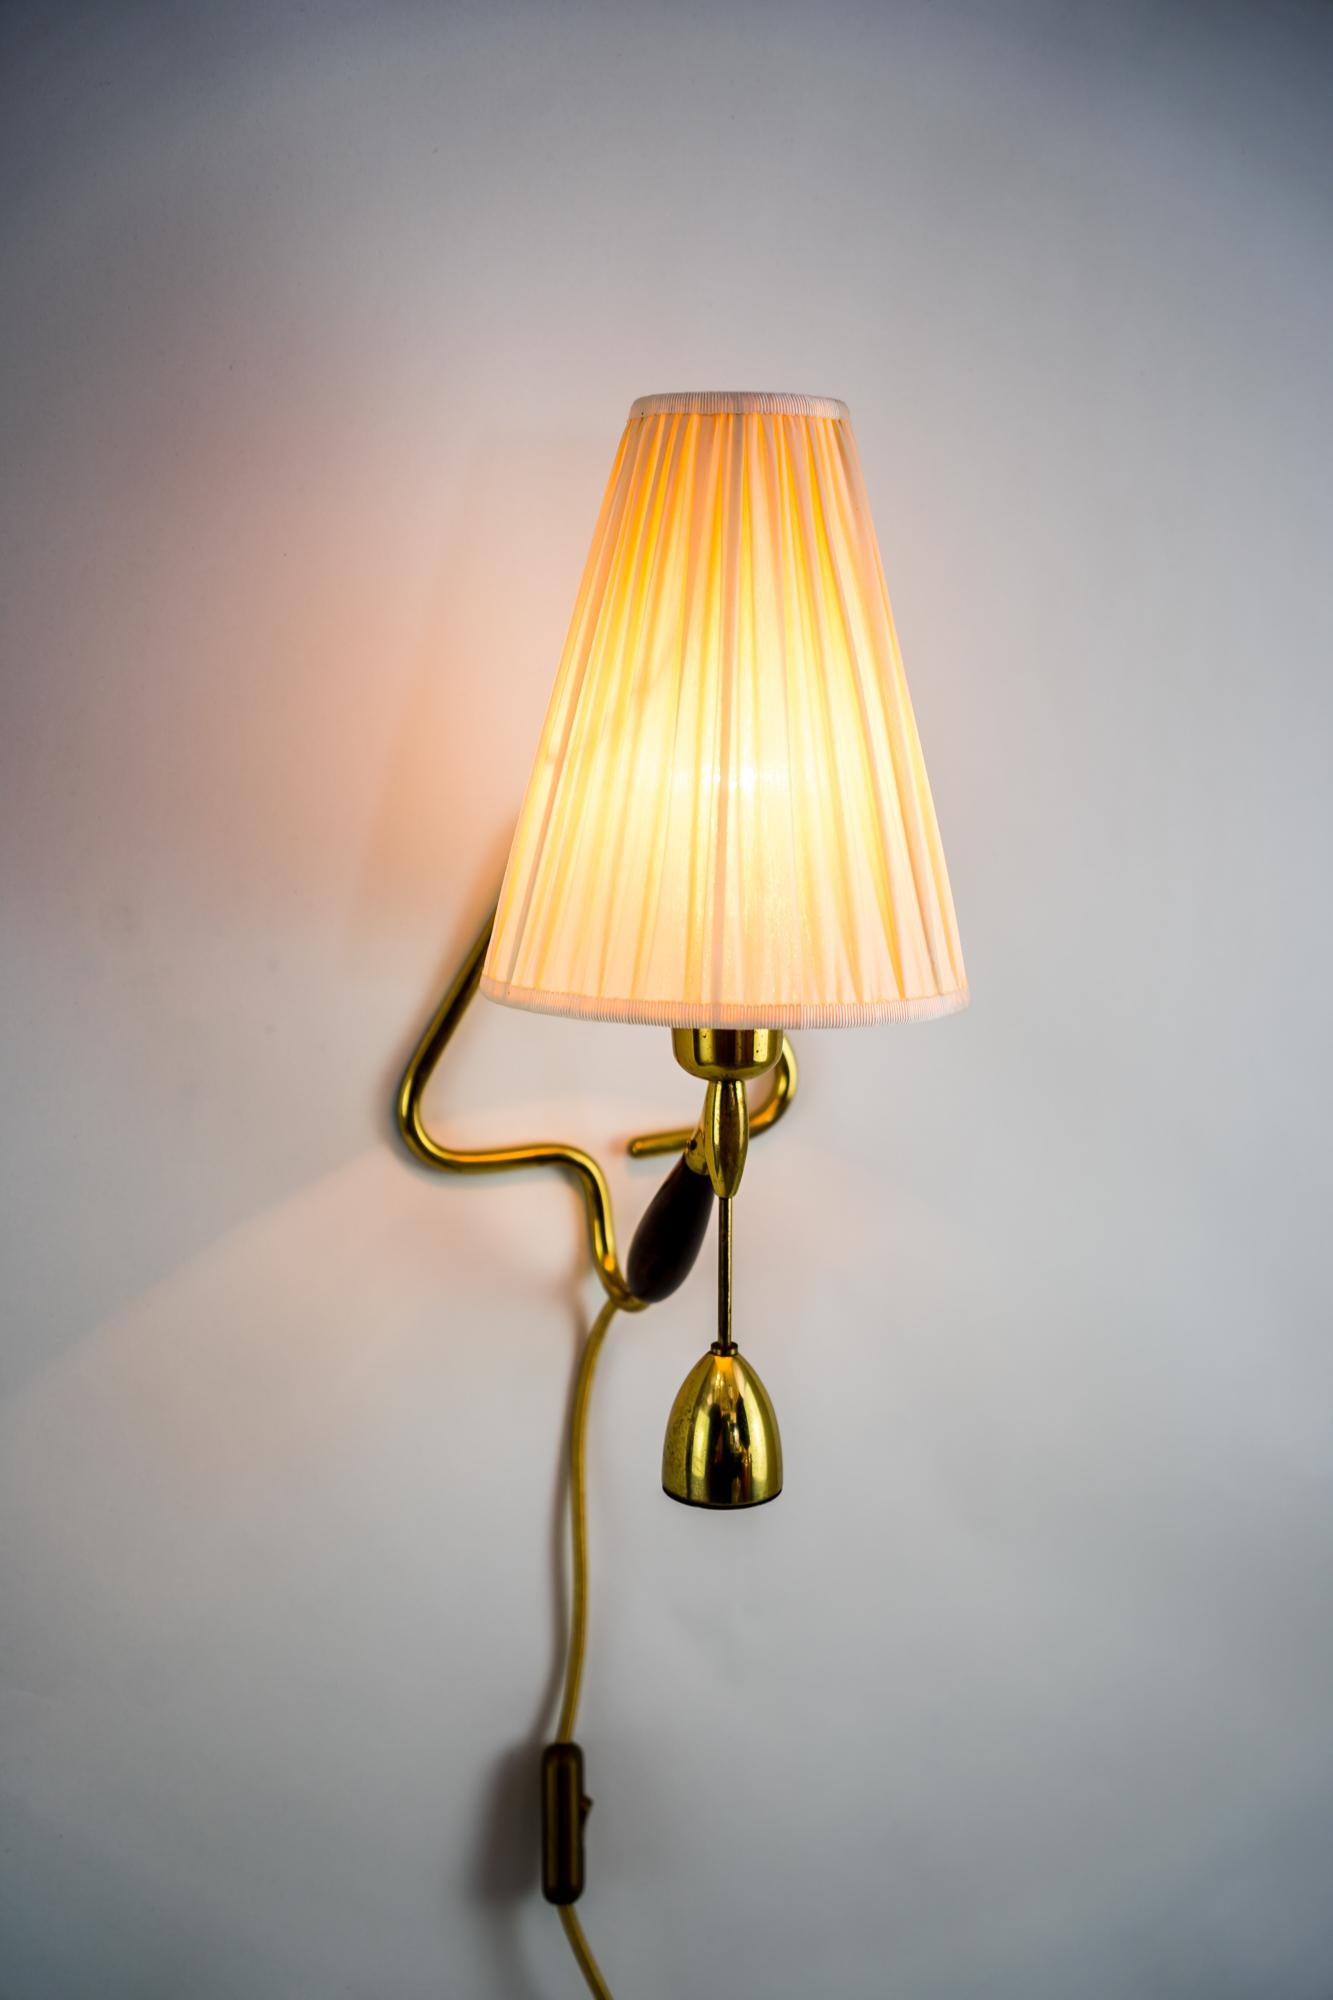 Lacquered Rupert Nikoll Table or Wall Lamp with Original Shade, circa 1950s